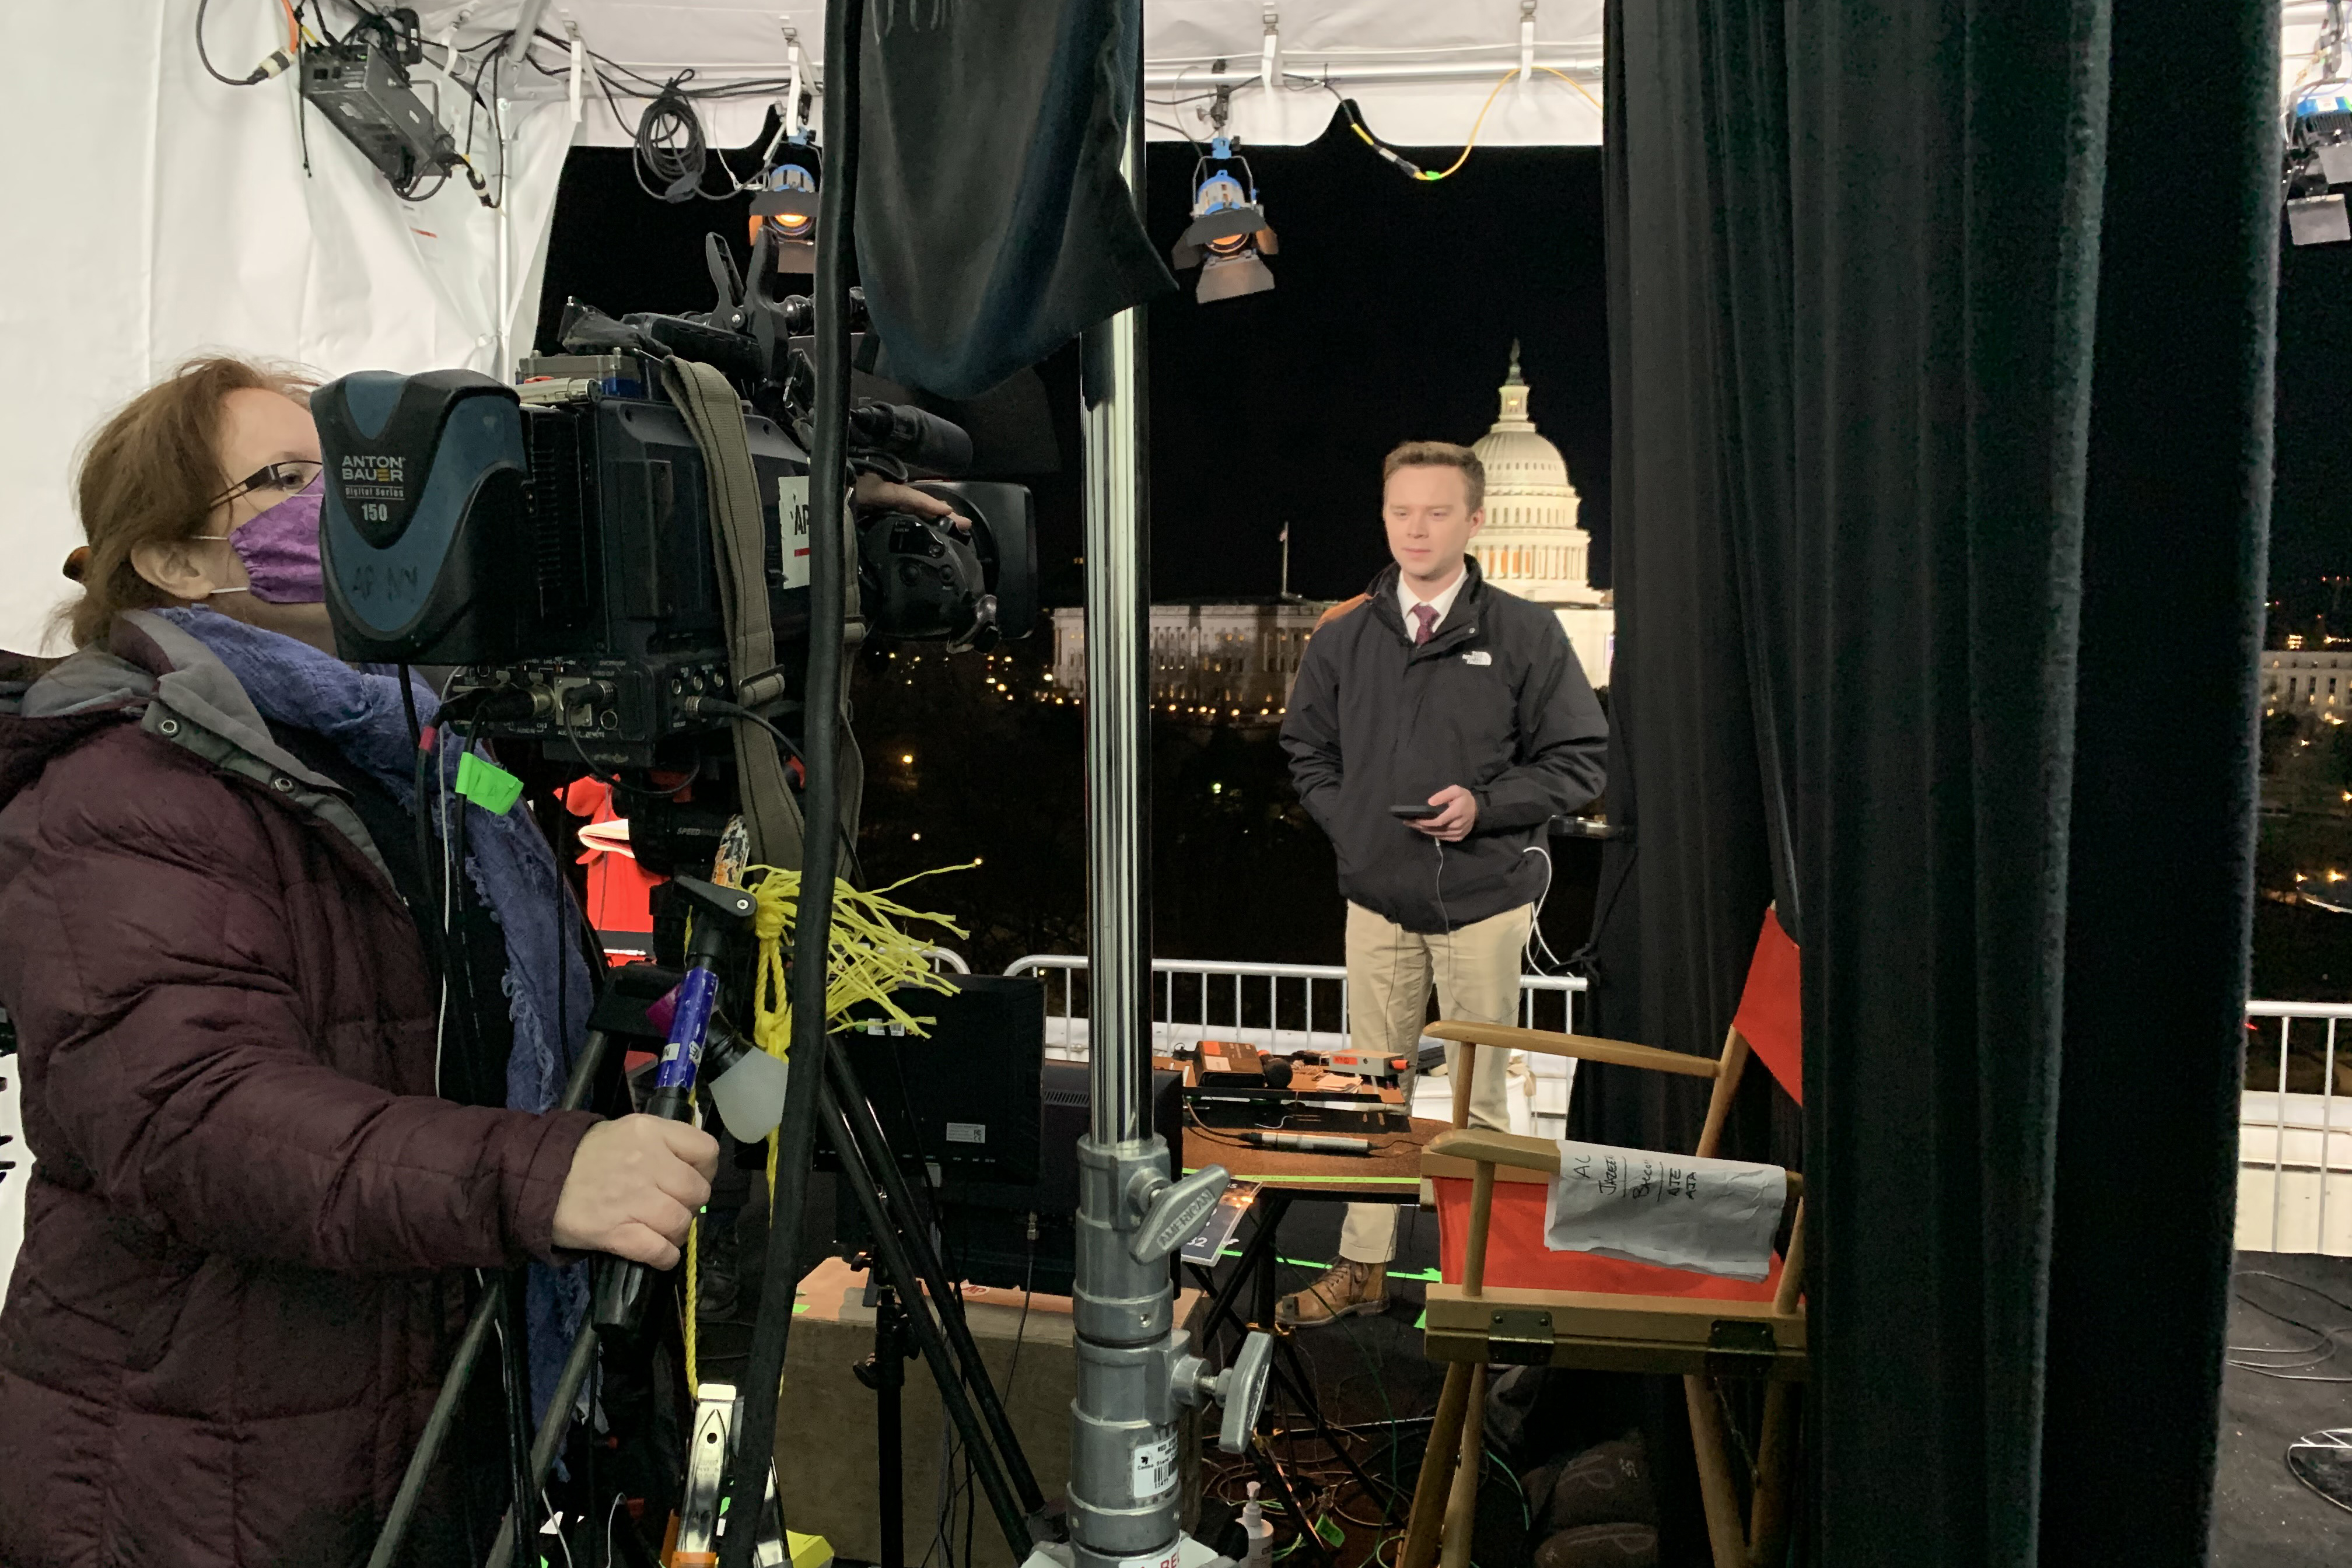 OU Student being filmed in Washington D.C.